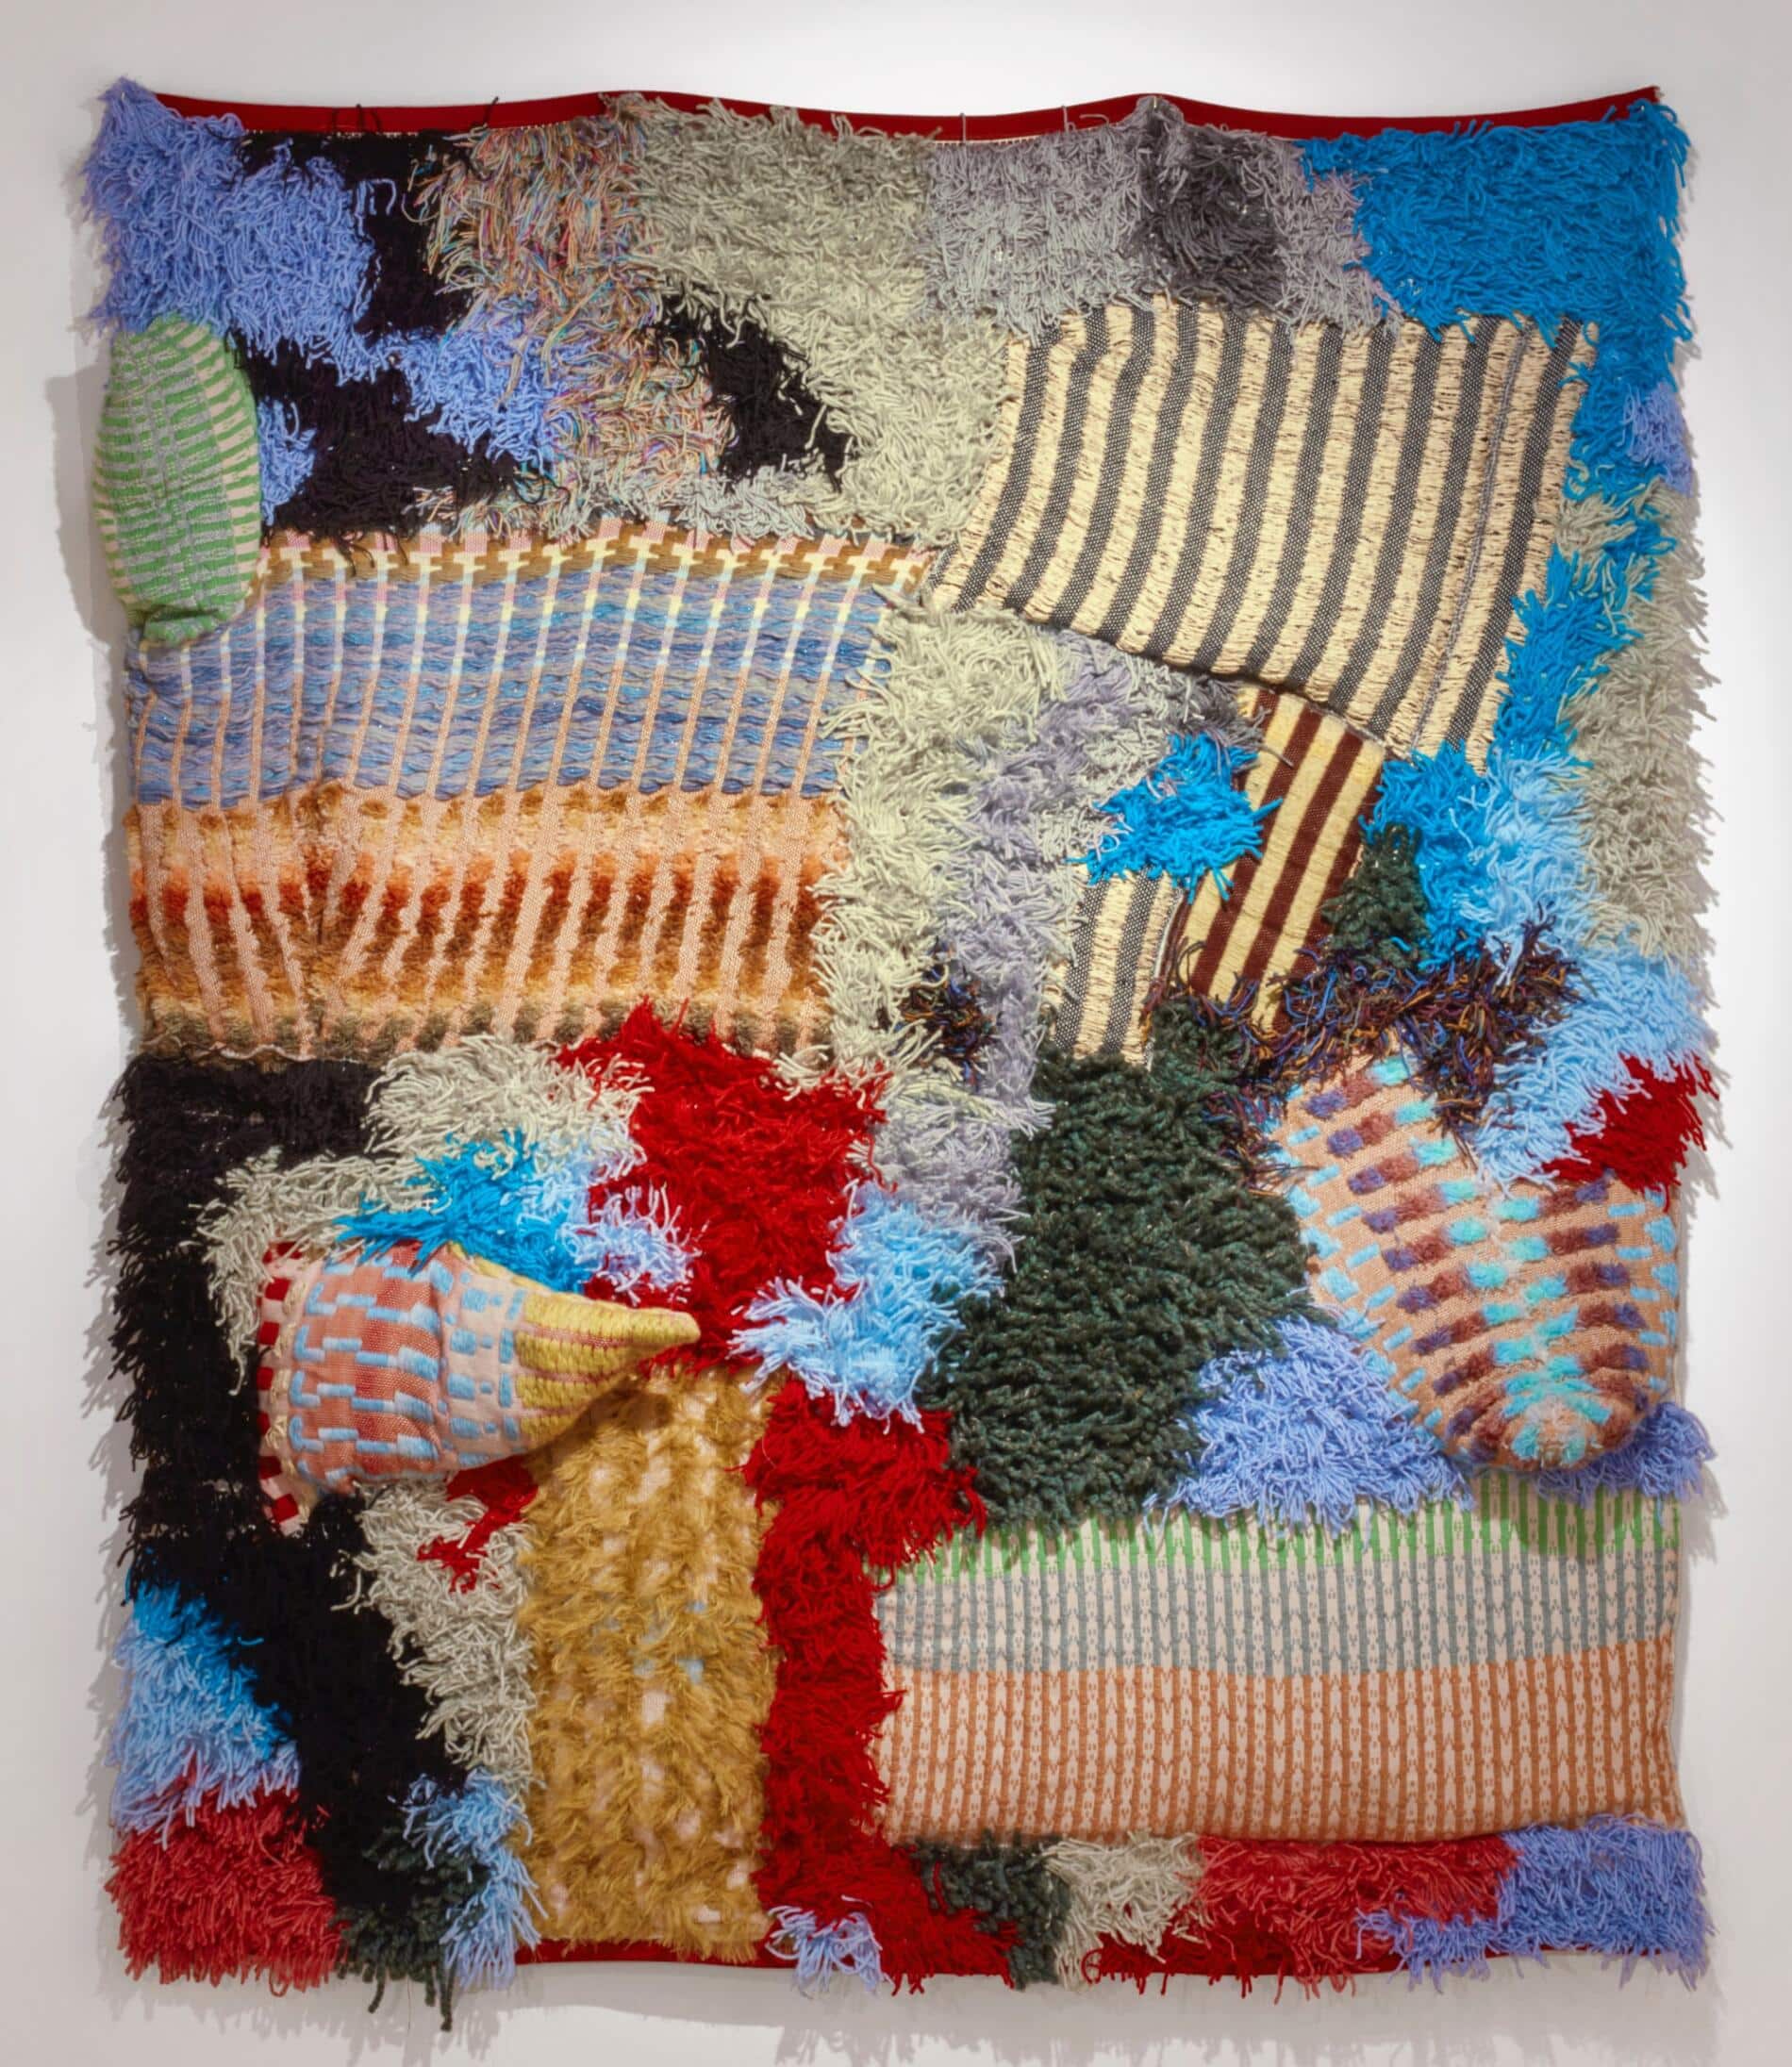 Sarah Zapata obra textil How often they move between the planets II